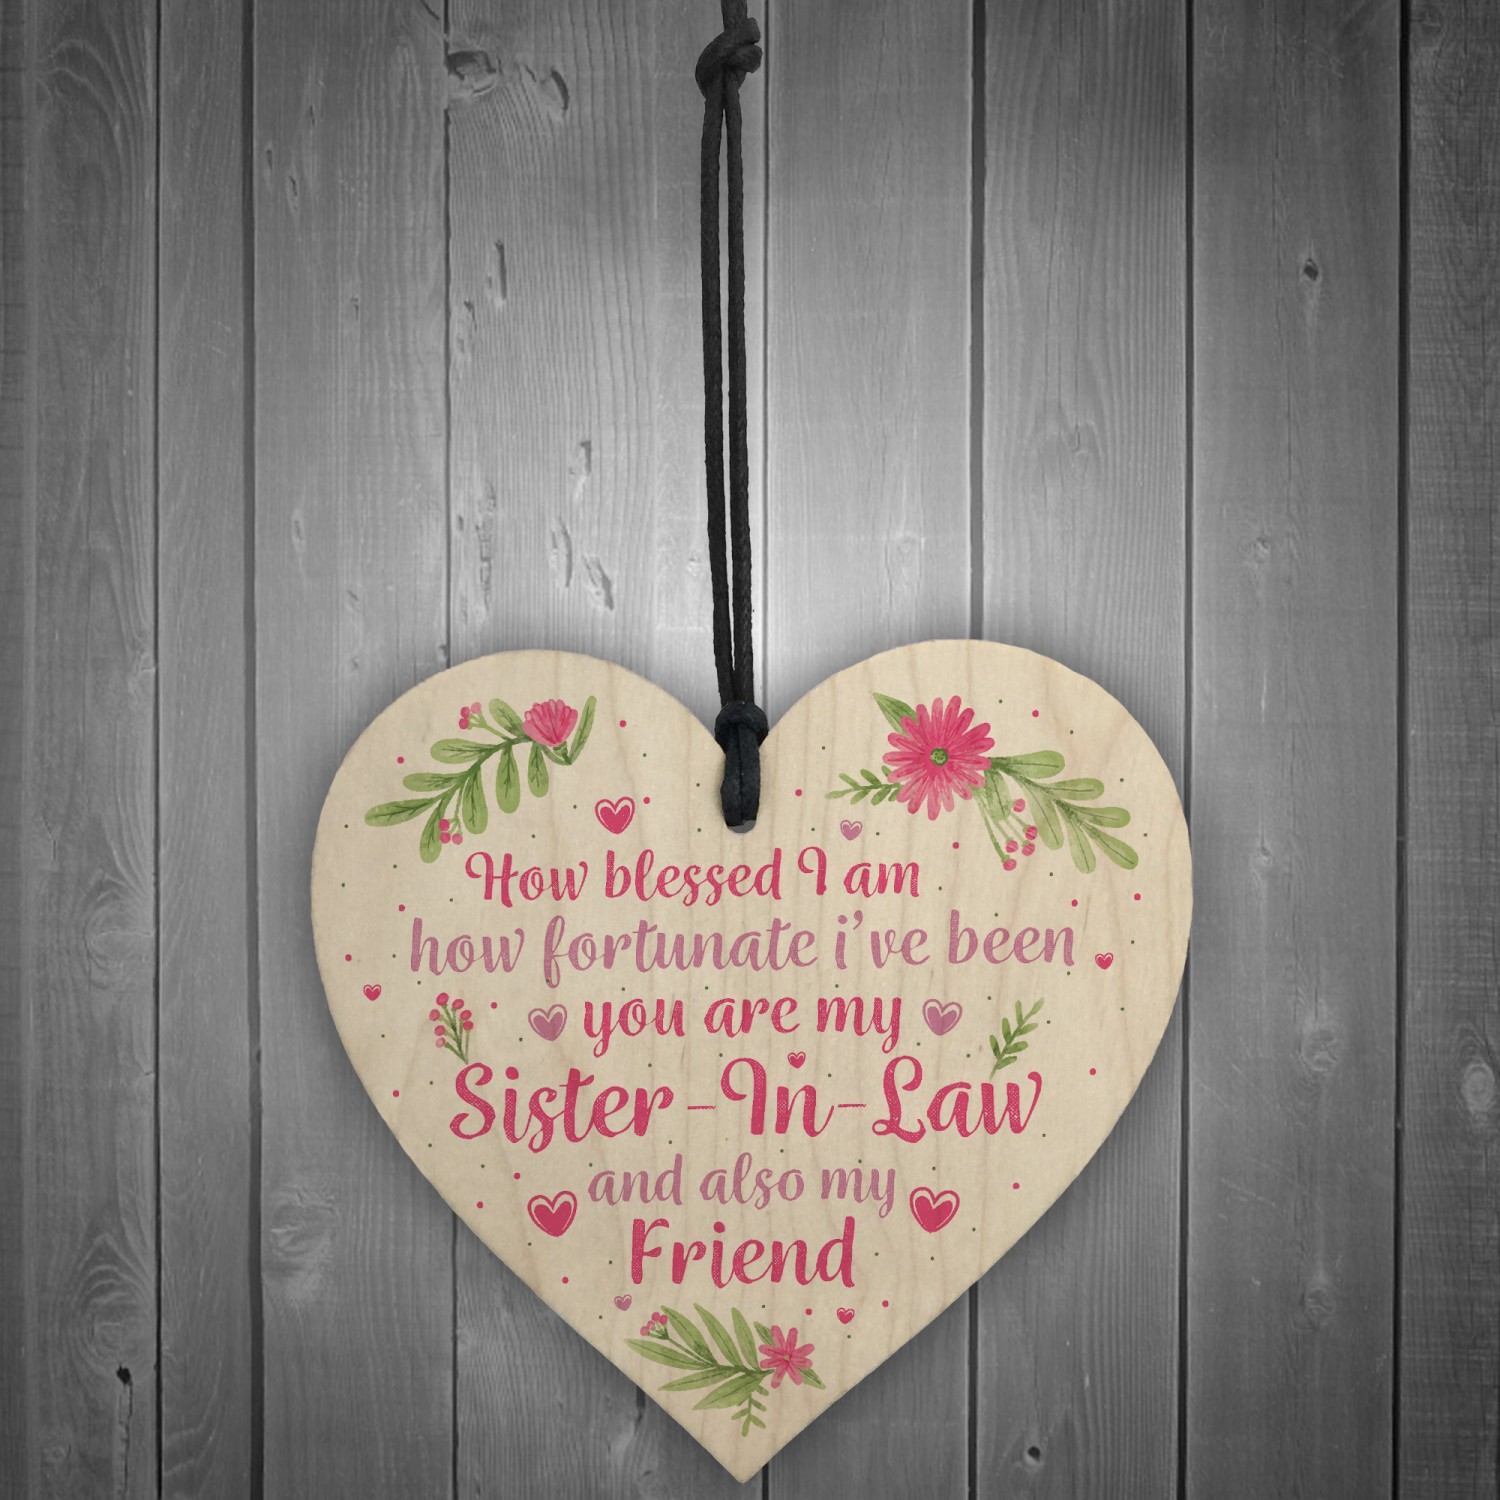 101 Best Sister-in-Law Birthday Messages and Quotes 